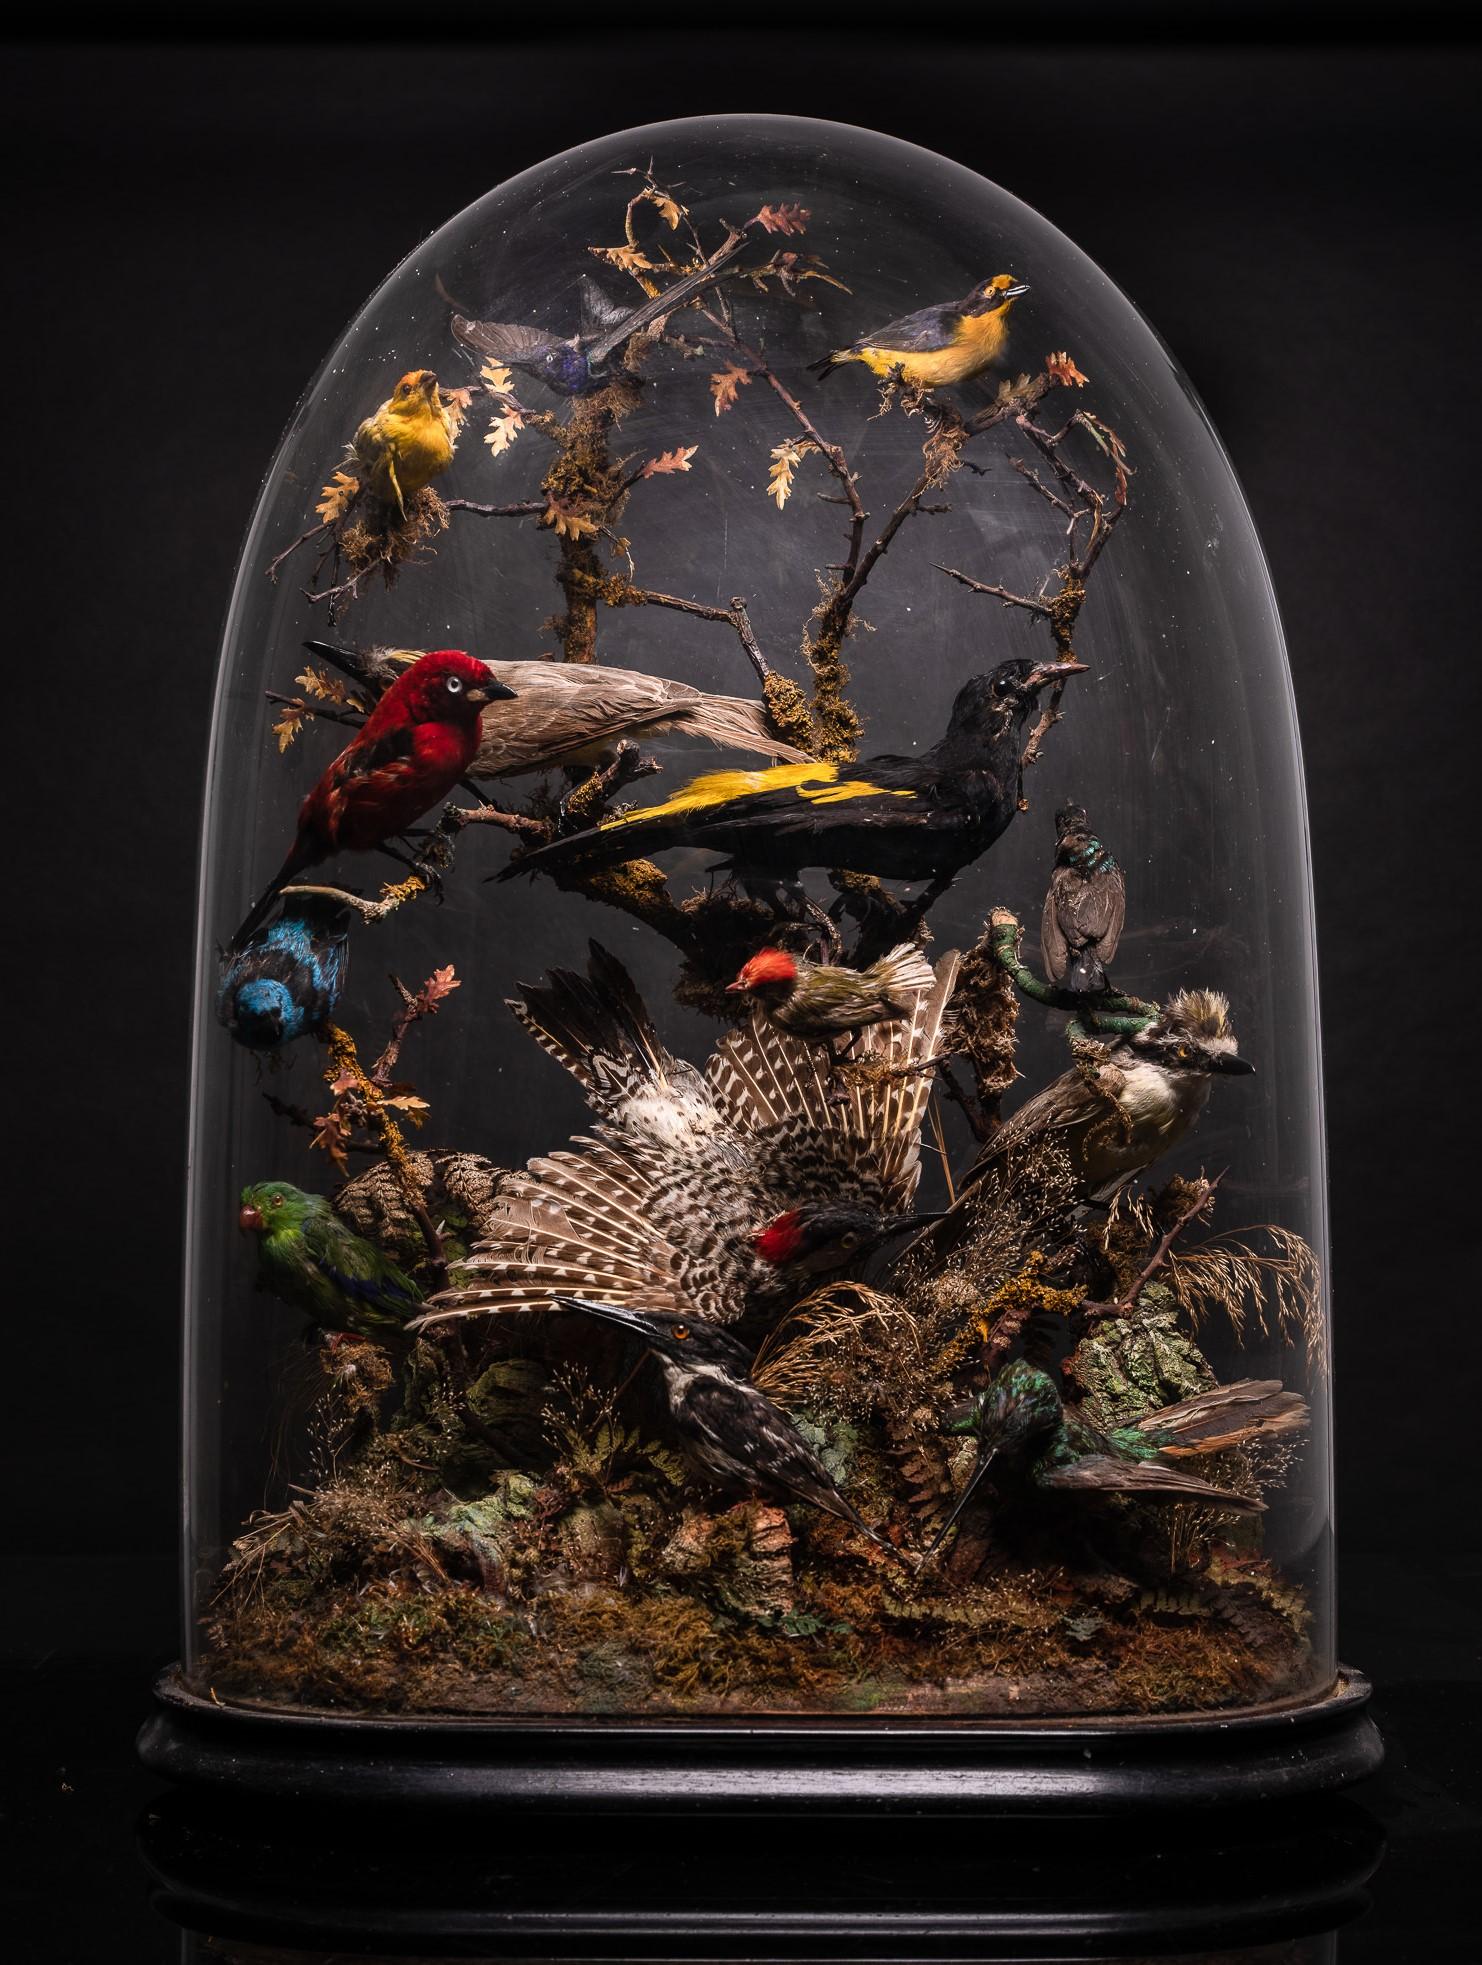 The British taxidermist and entomologist James Gardner Sr made this Victorian glass dome with exotic birds. His studio and shop were located at 52 High Holborn Street and later at 426 Oxford Street in London. His well-executed birds and mammals were